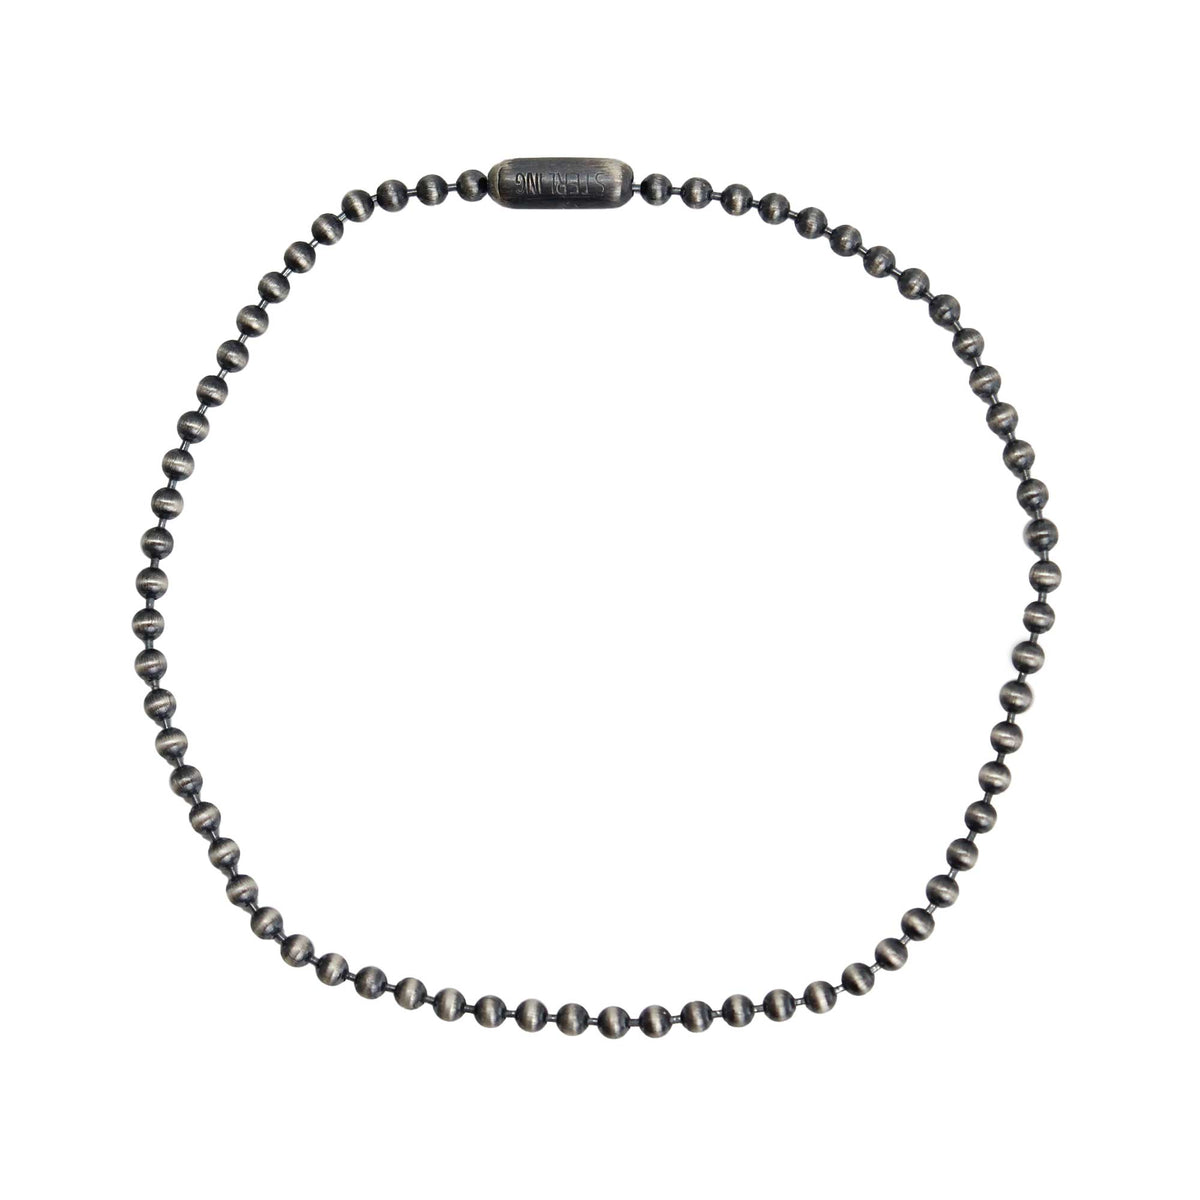 2mm Sterling Silver Bead Ball Chain Bracelet or Necklace – Kathy Bankston